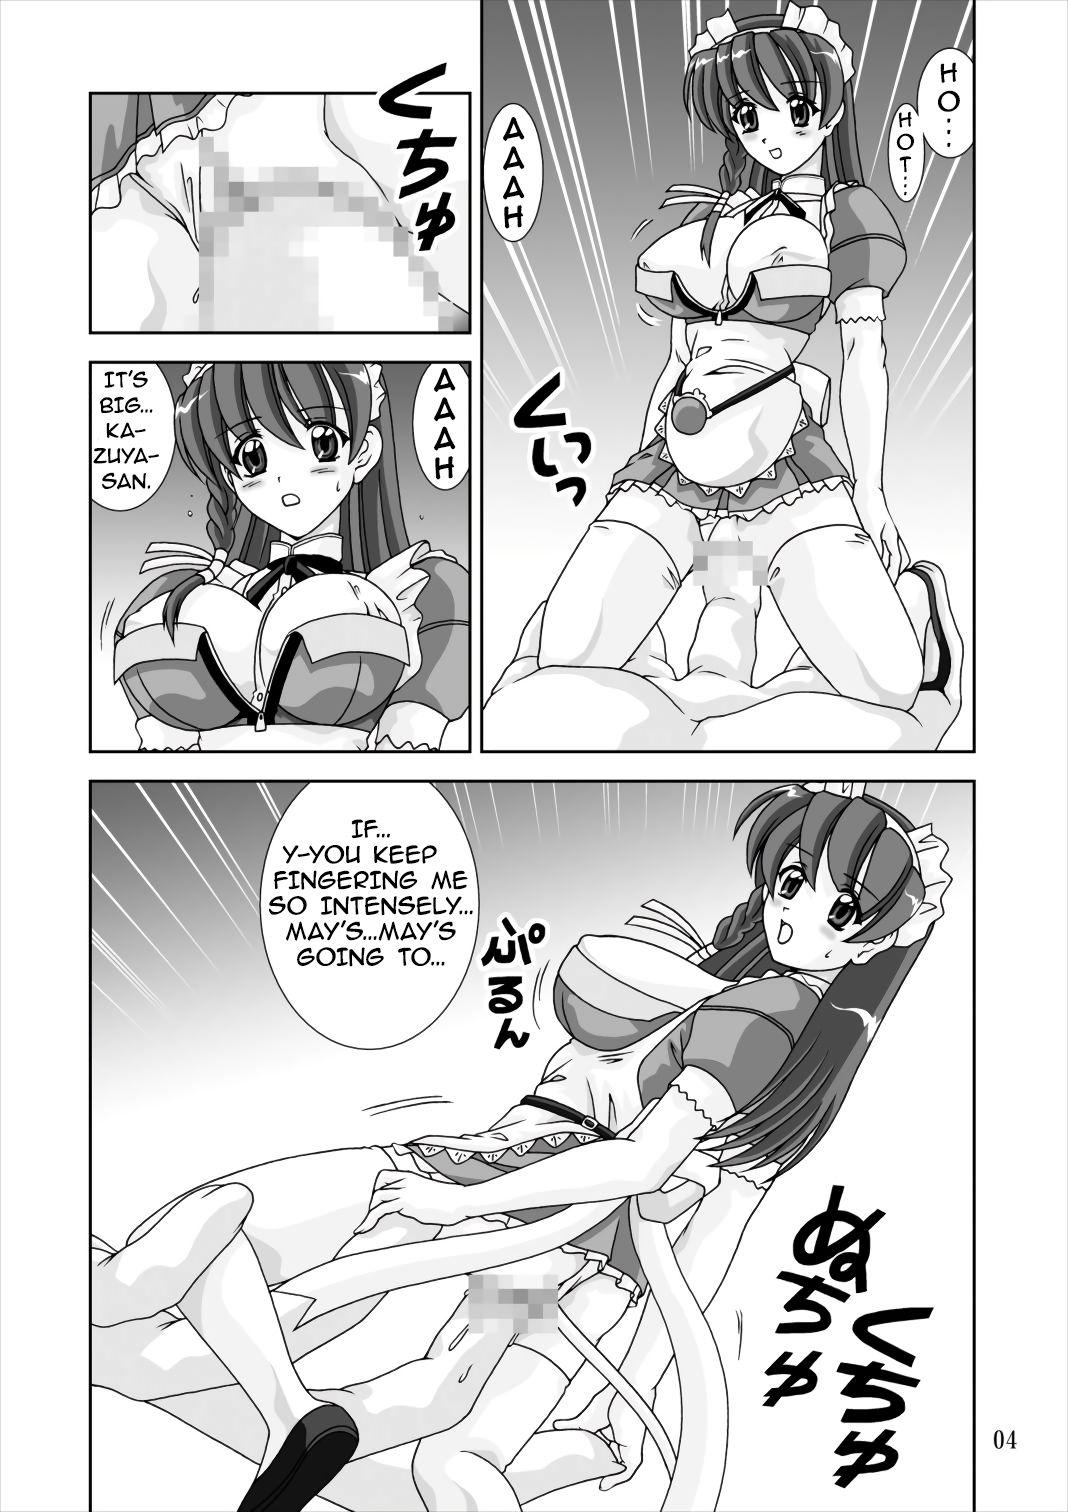 Mms Shiboritate | May I Offer a Squeeze? - Hand maid may Red Head - Page 4